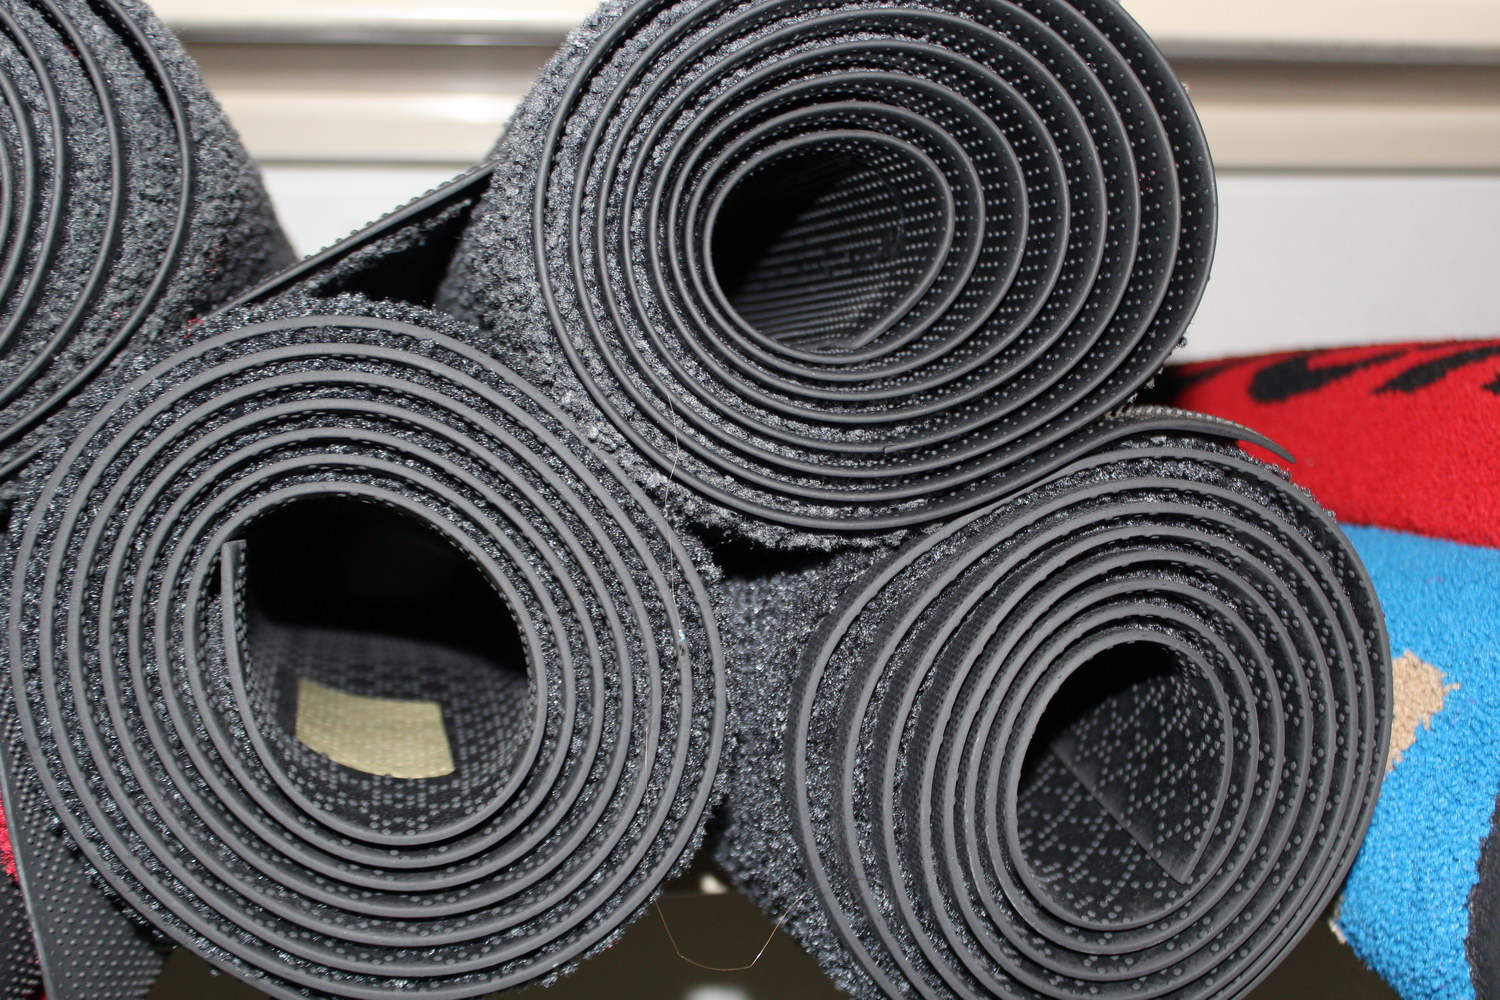 Patterns in an ordinary stack of rubber mats. Photoshoot for CompleteWorkwear, November 2012.